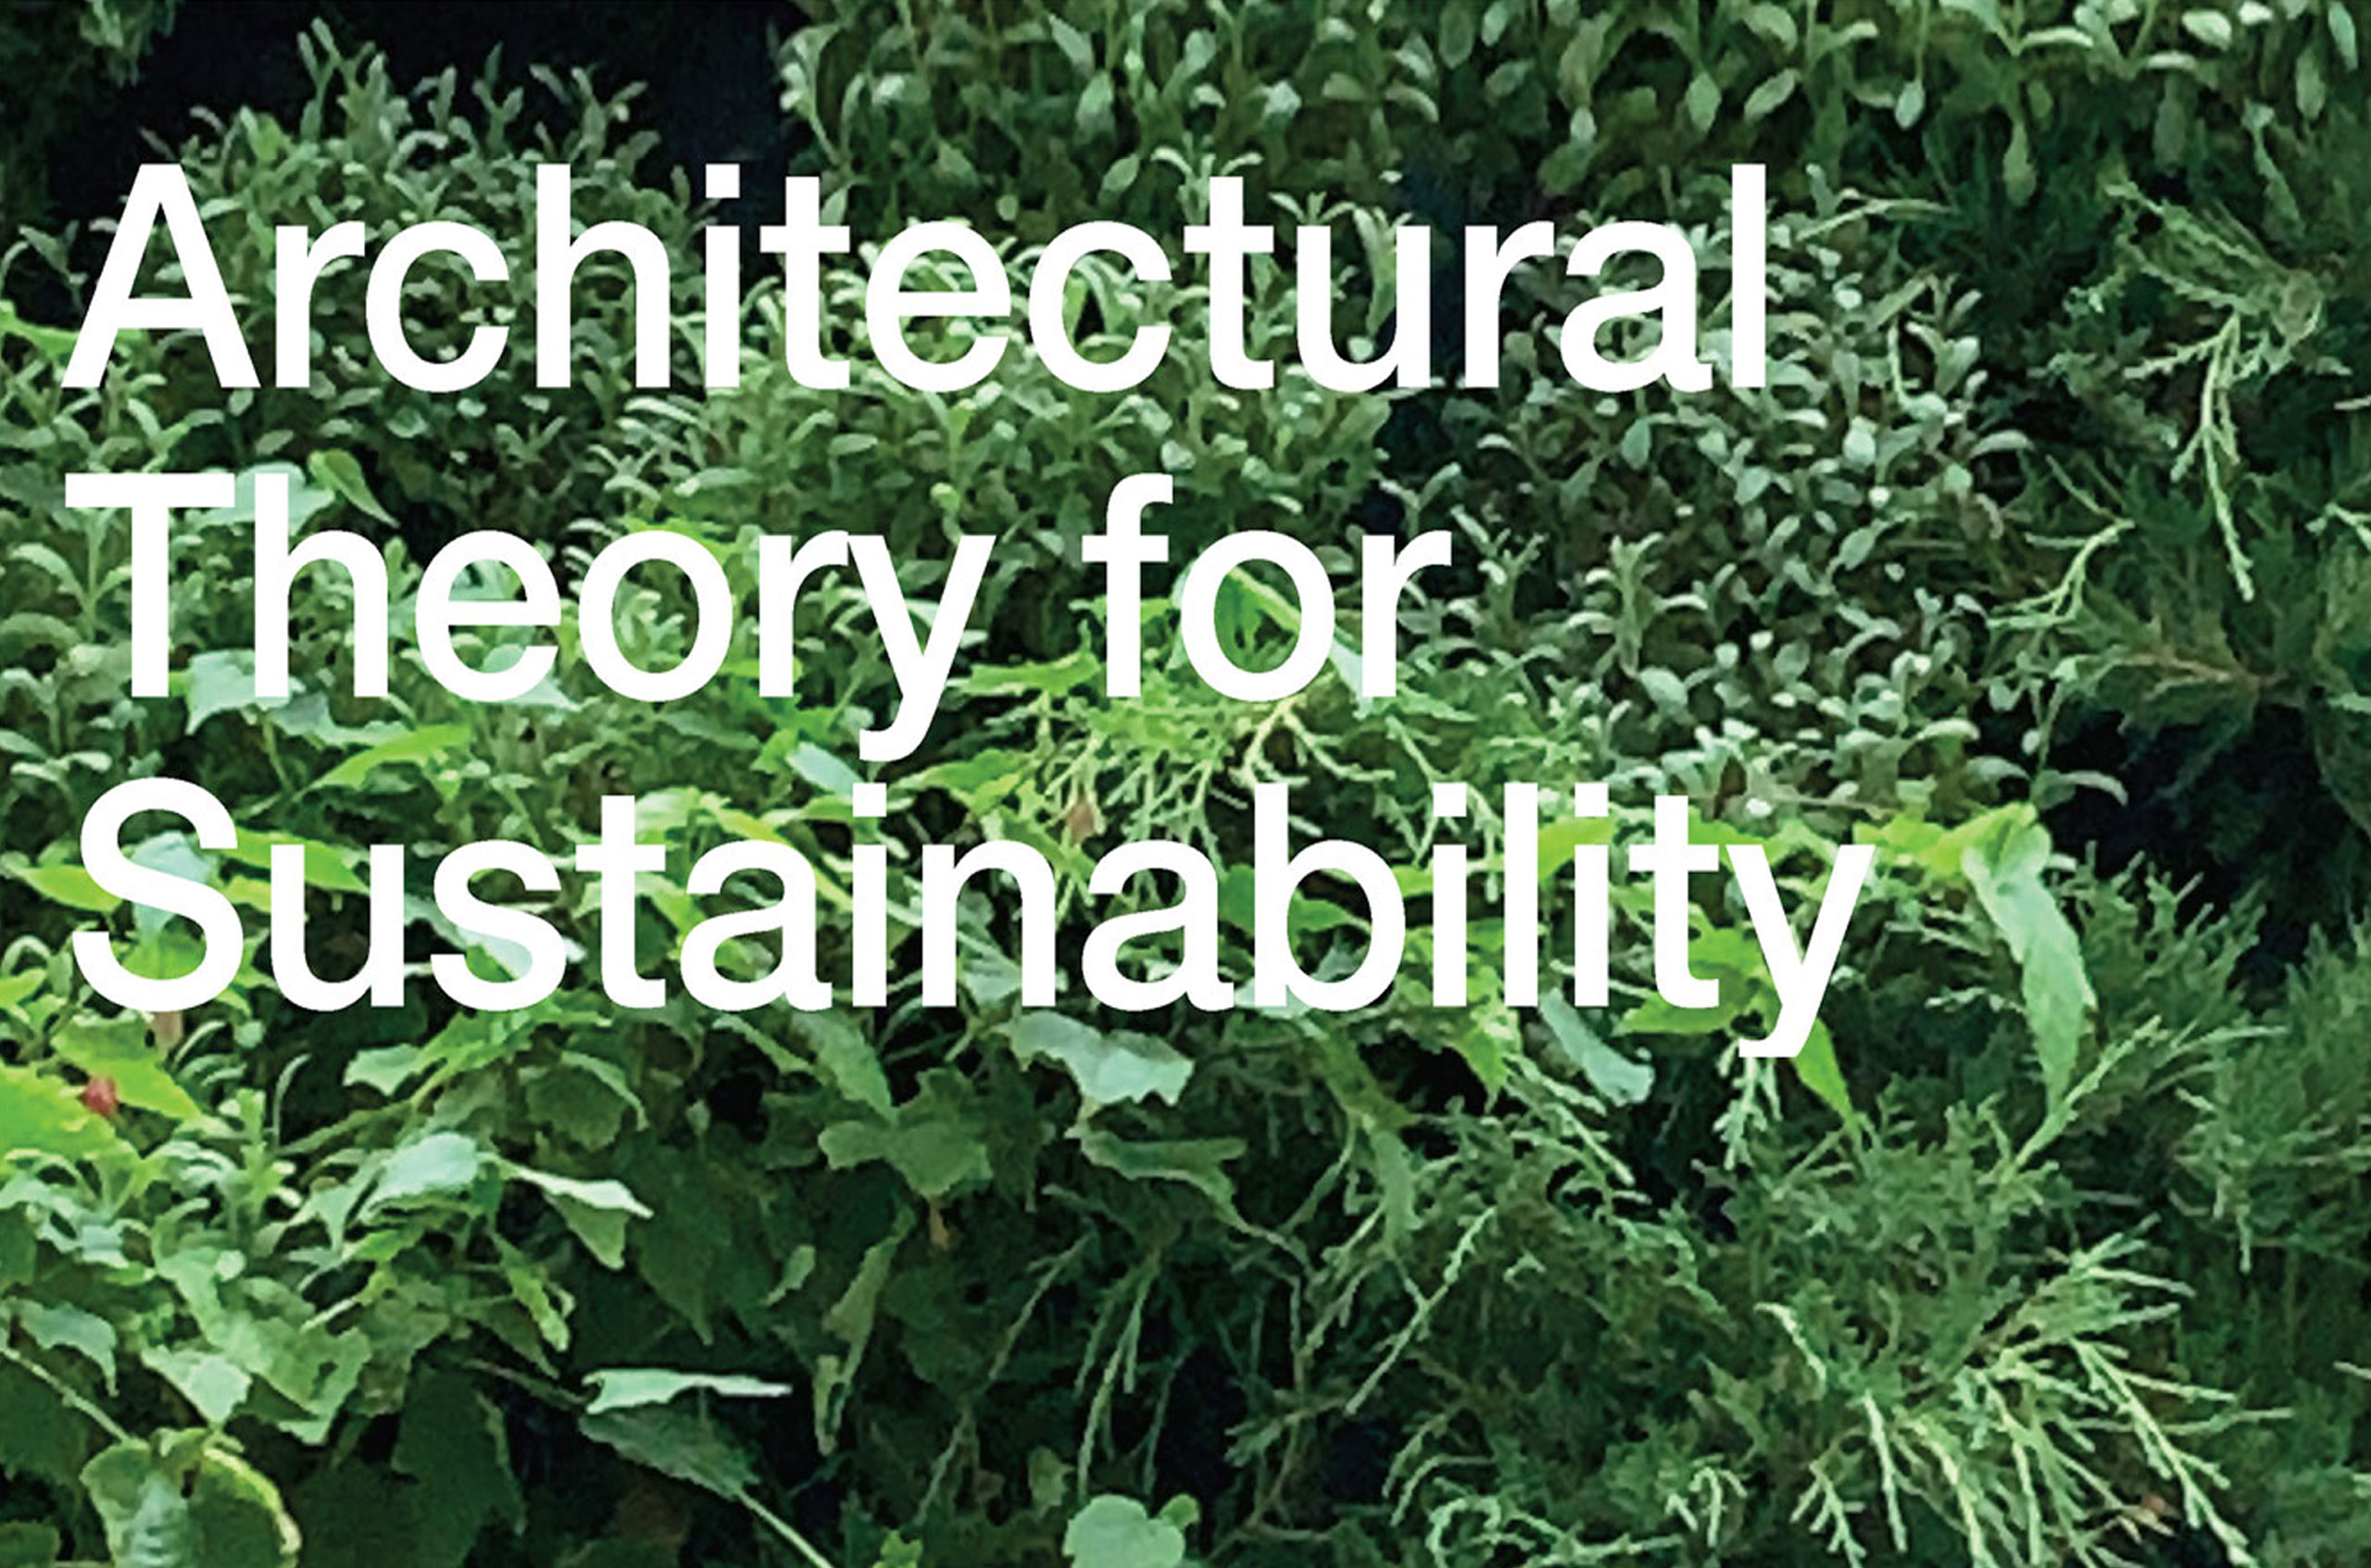 Architectural Theory for Sustainability